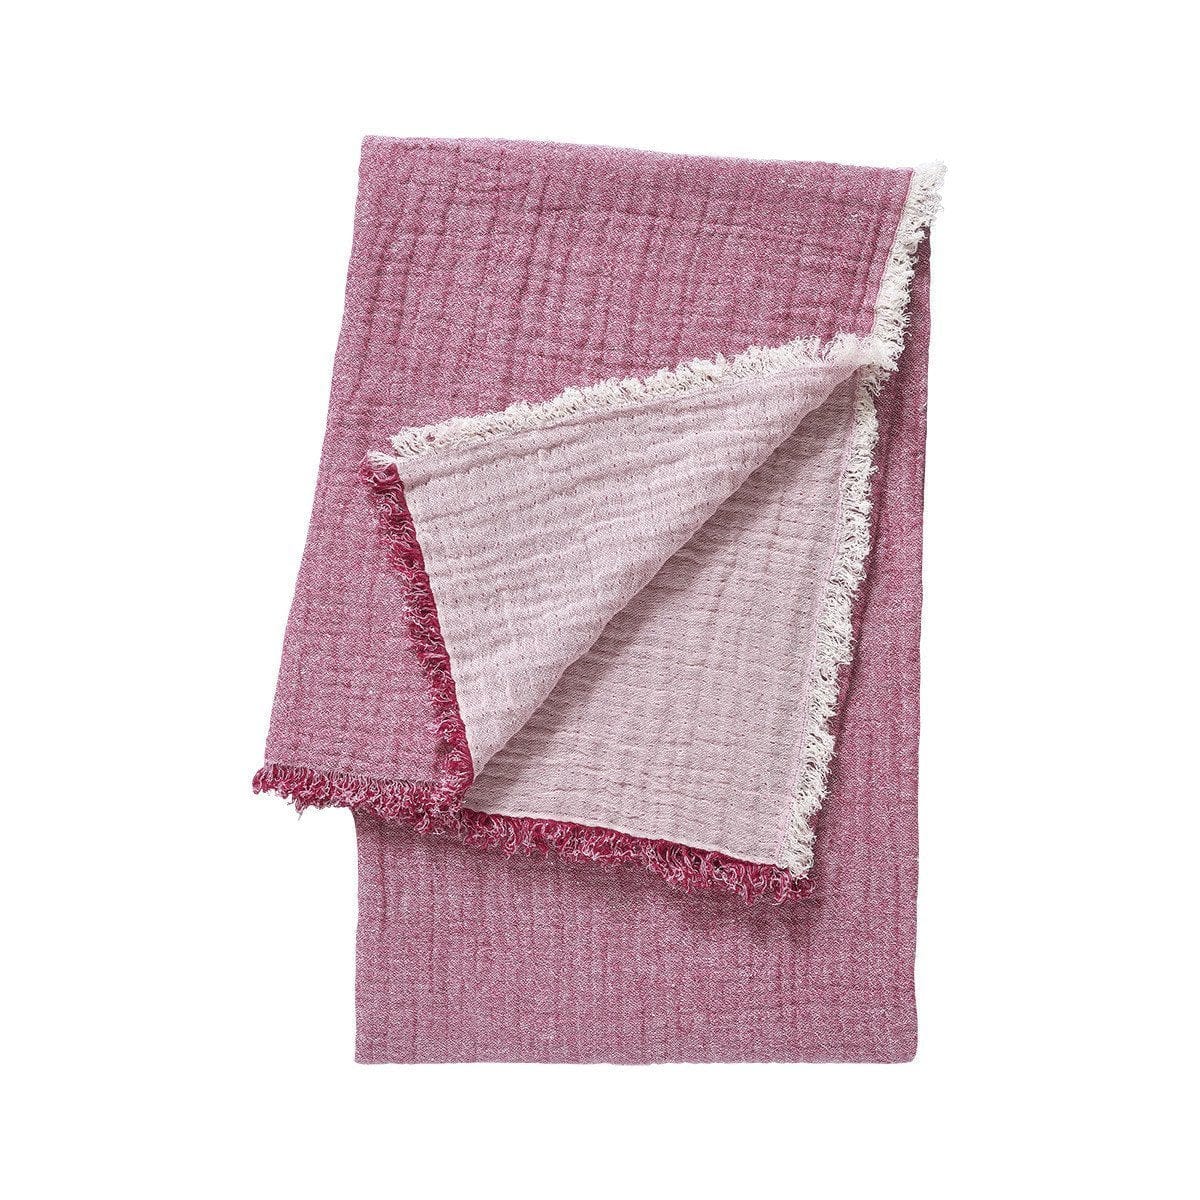 Throw Iosis Minorque Throw by Yves Delorme Hibiscus Yves Delorme